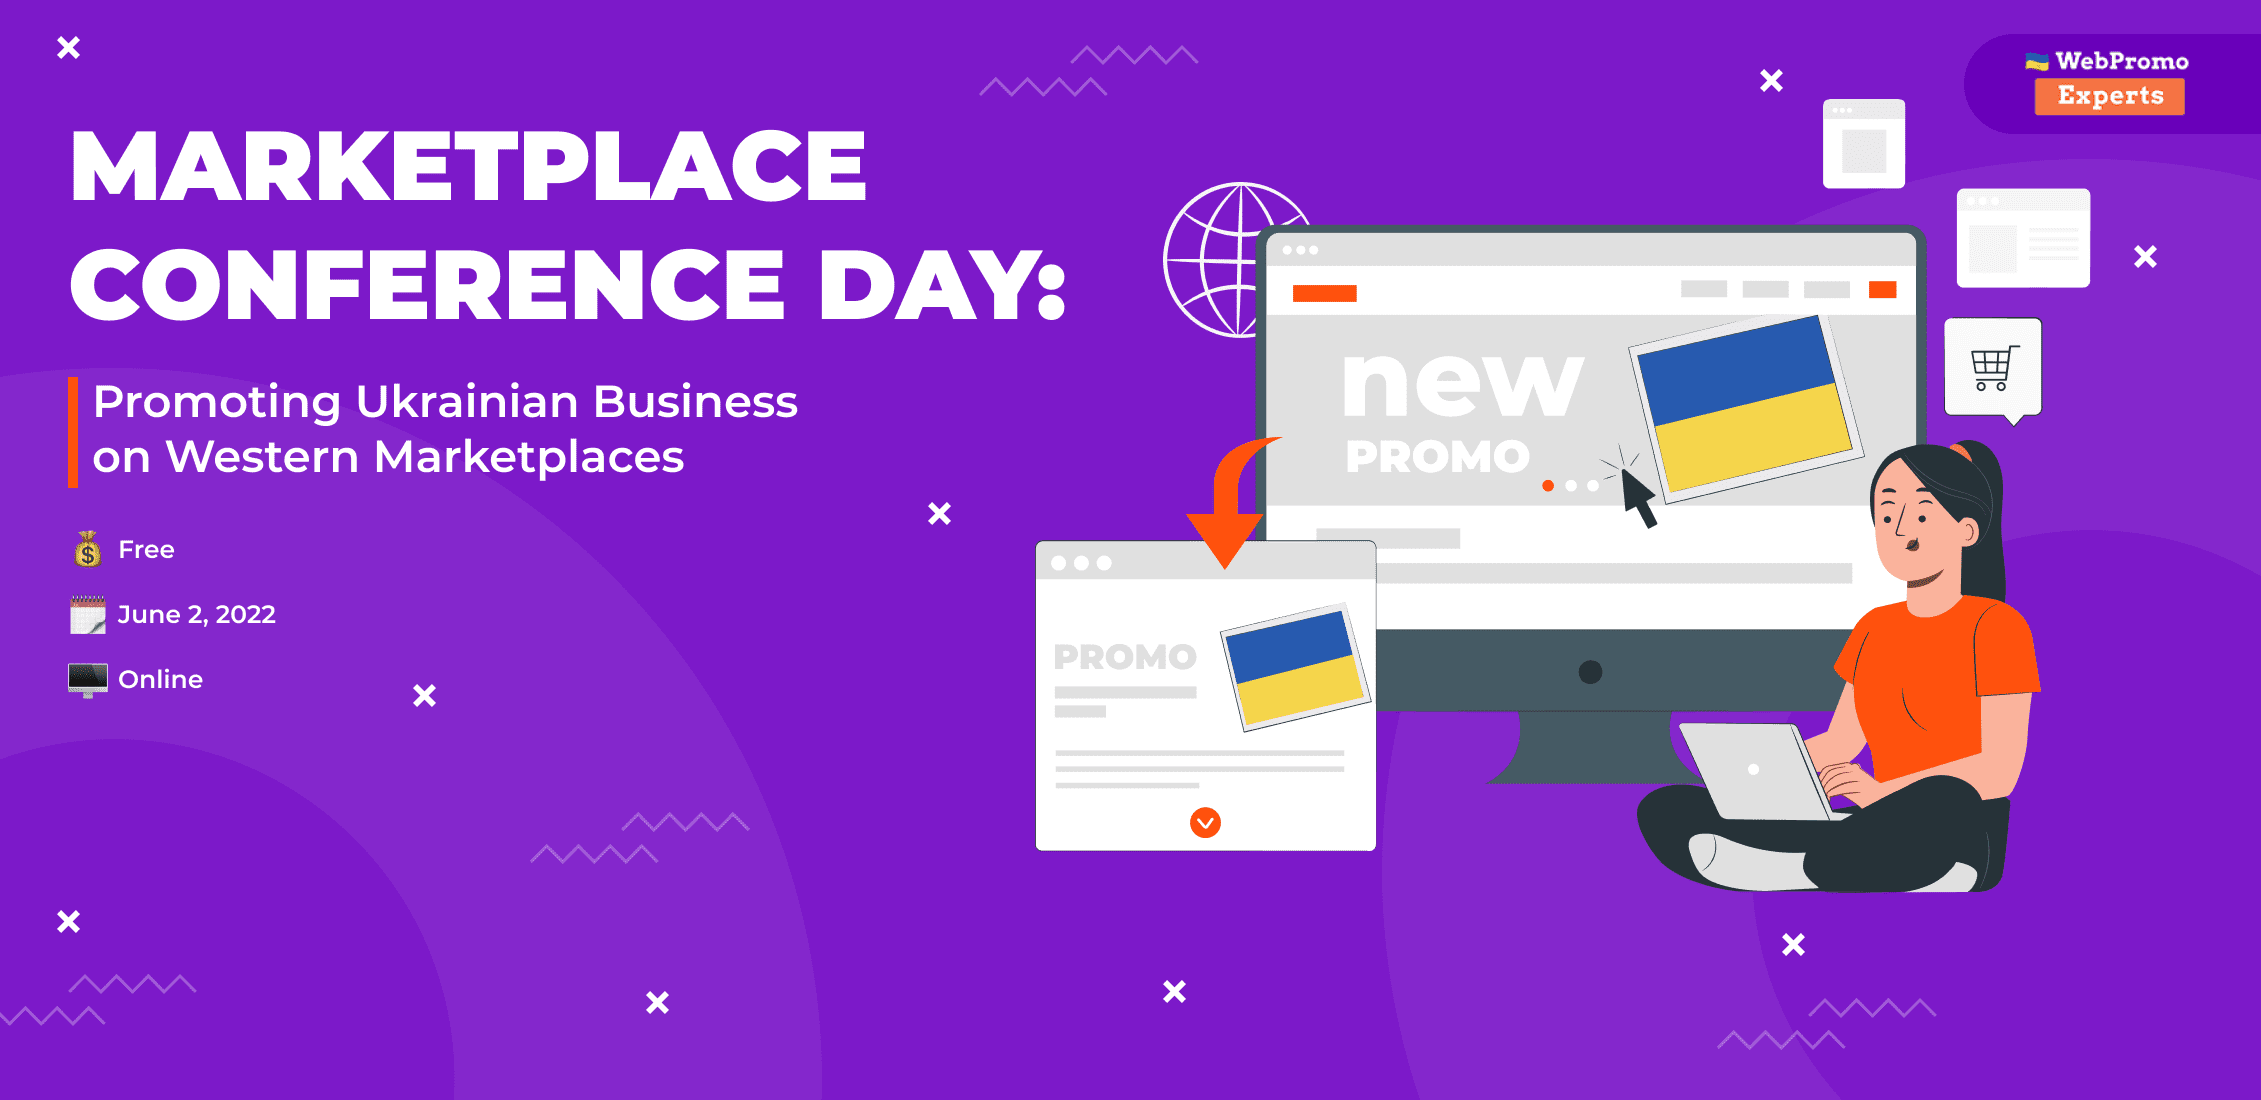 marketplace conference day by MasterBundles.